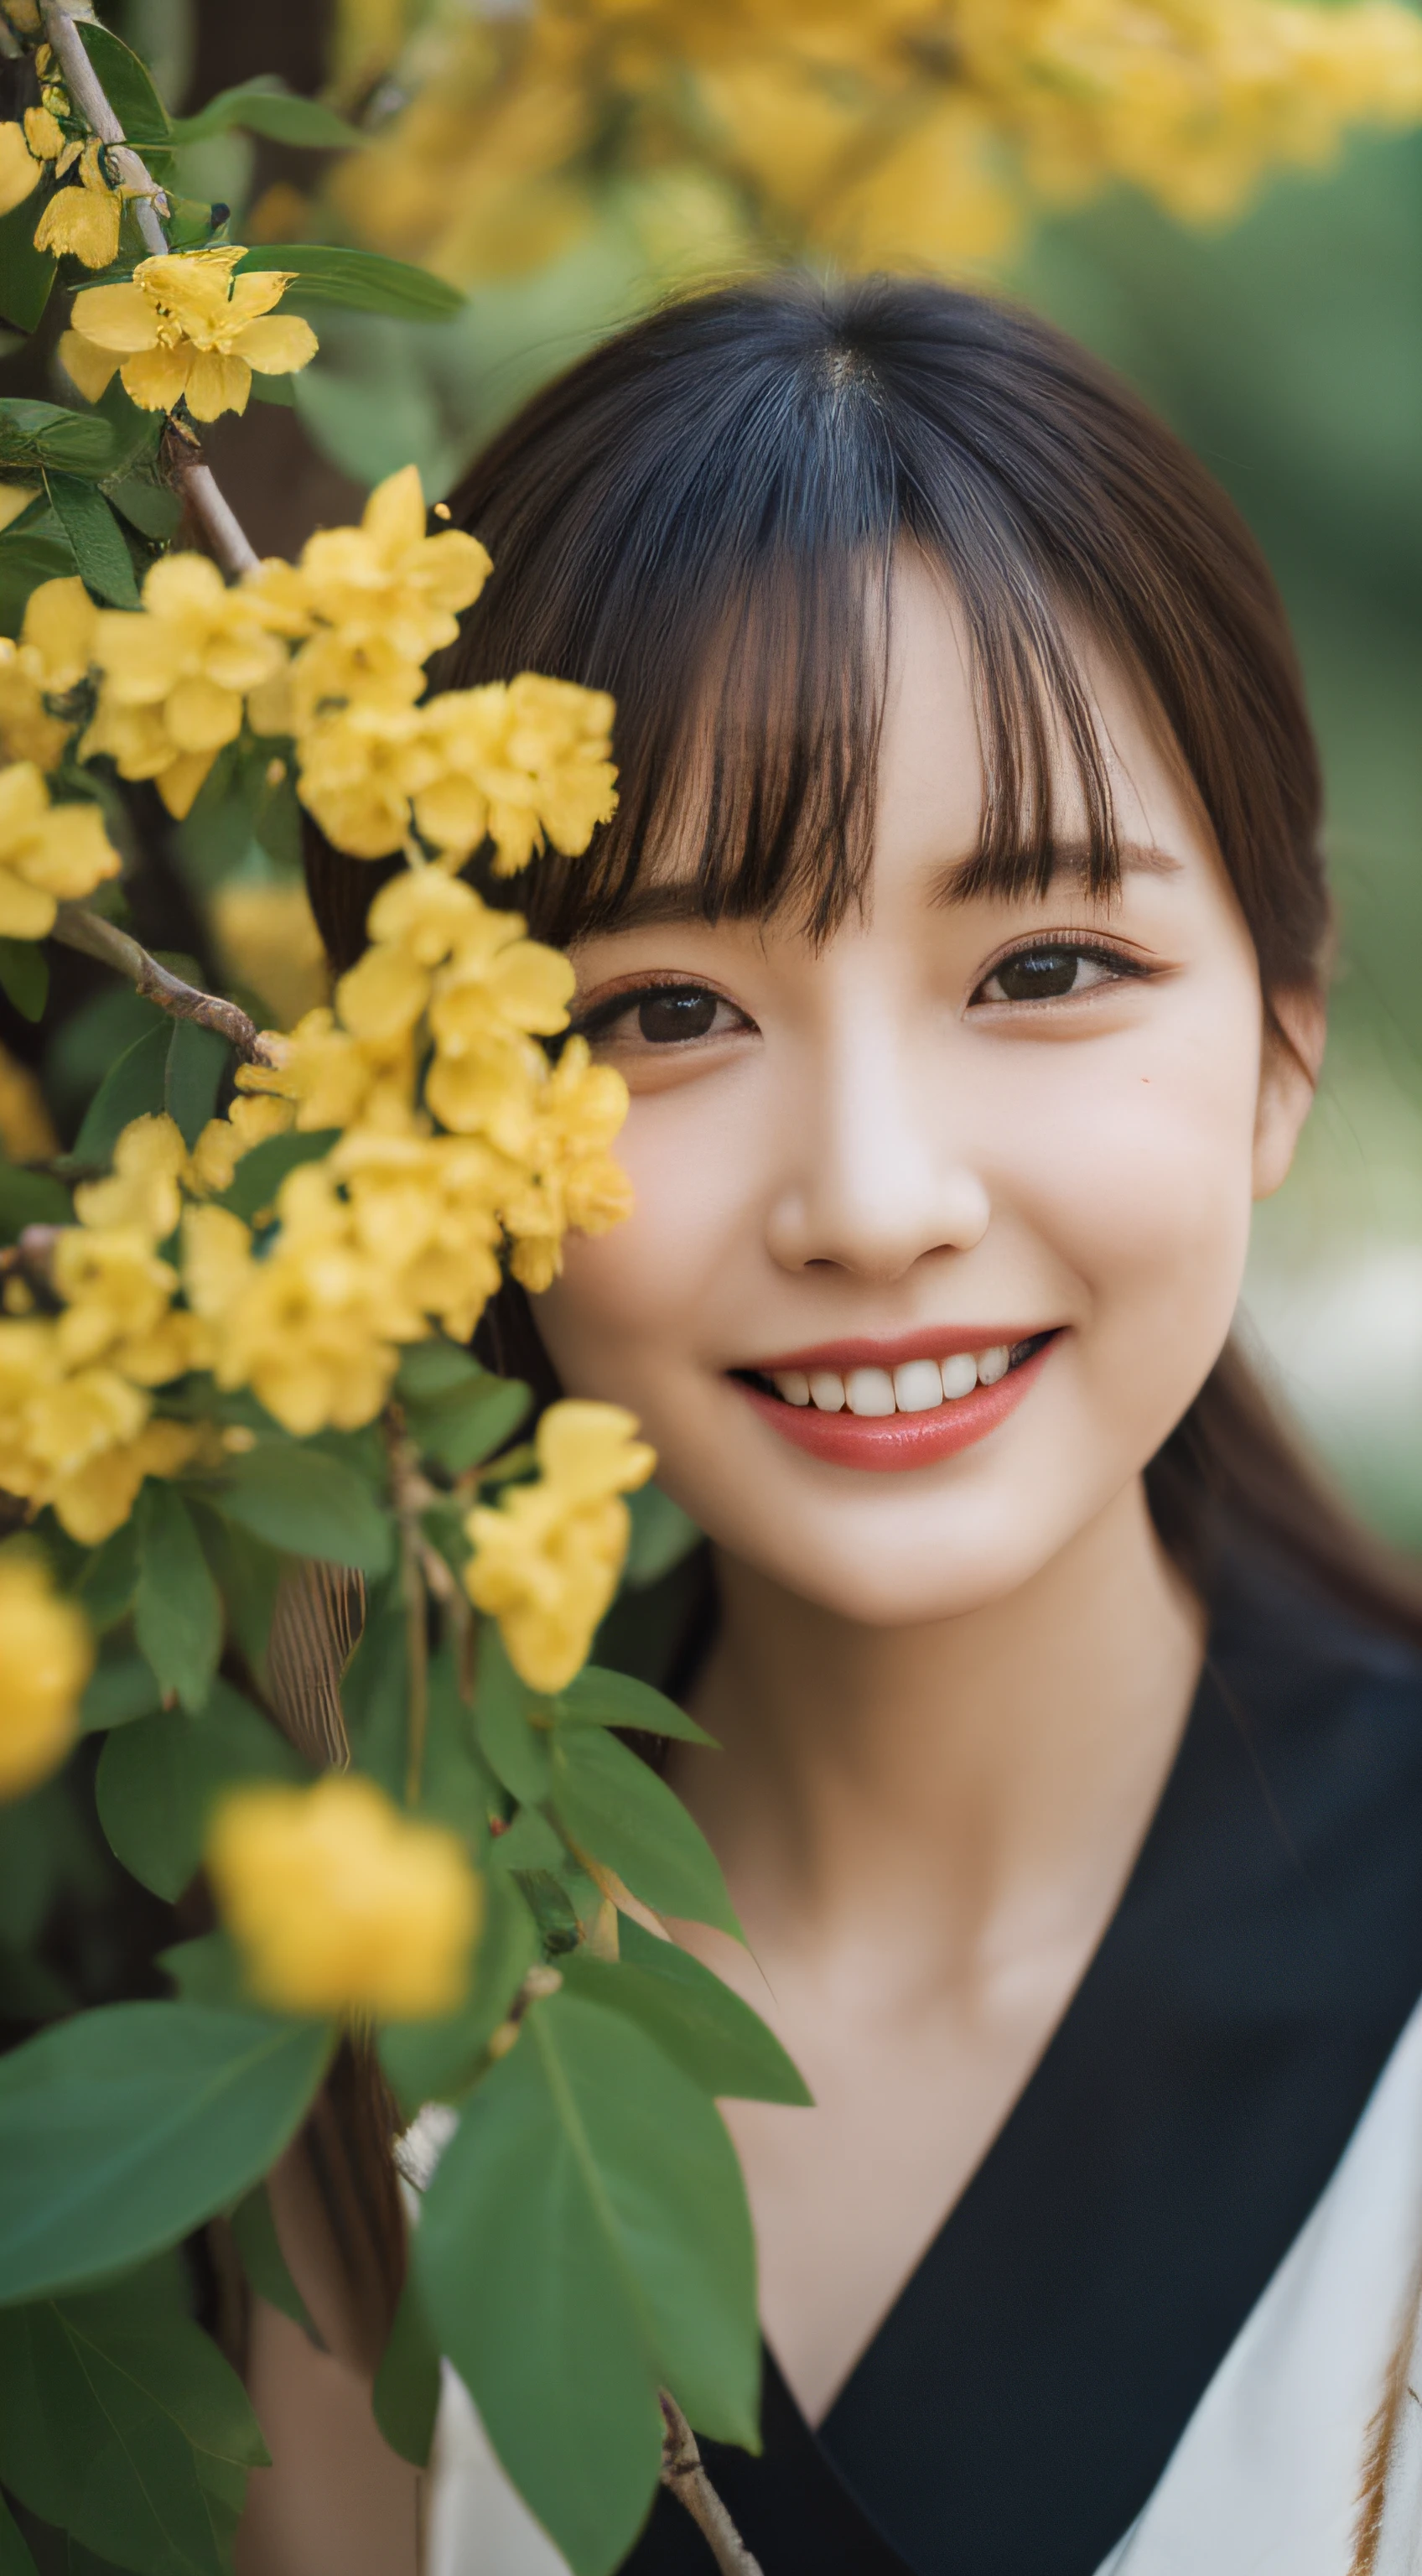 masterpiece, best quality, realistic, cinematic,
1girl, sitting, close-up portrait, red aodai, (smile:0.8), (yellow apricot blossom, (potted flowers:0.8), flowers, falling petals, tree branch),  flower in hair, walking in garden